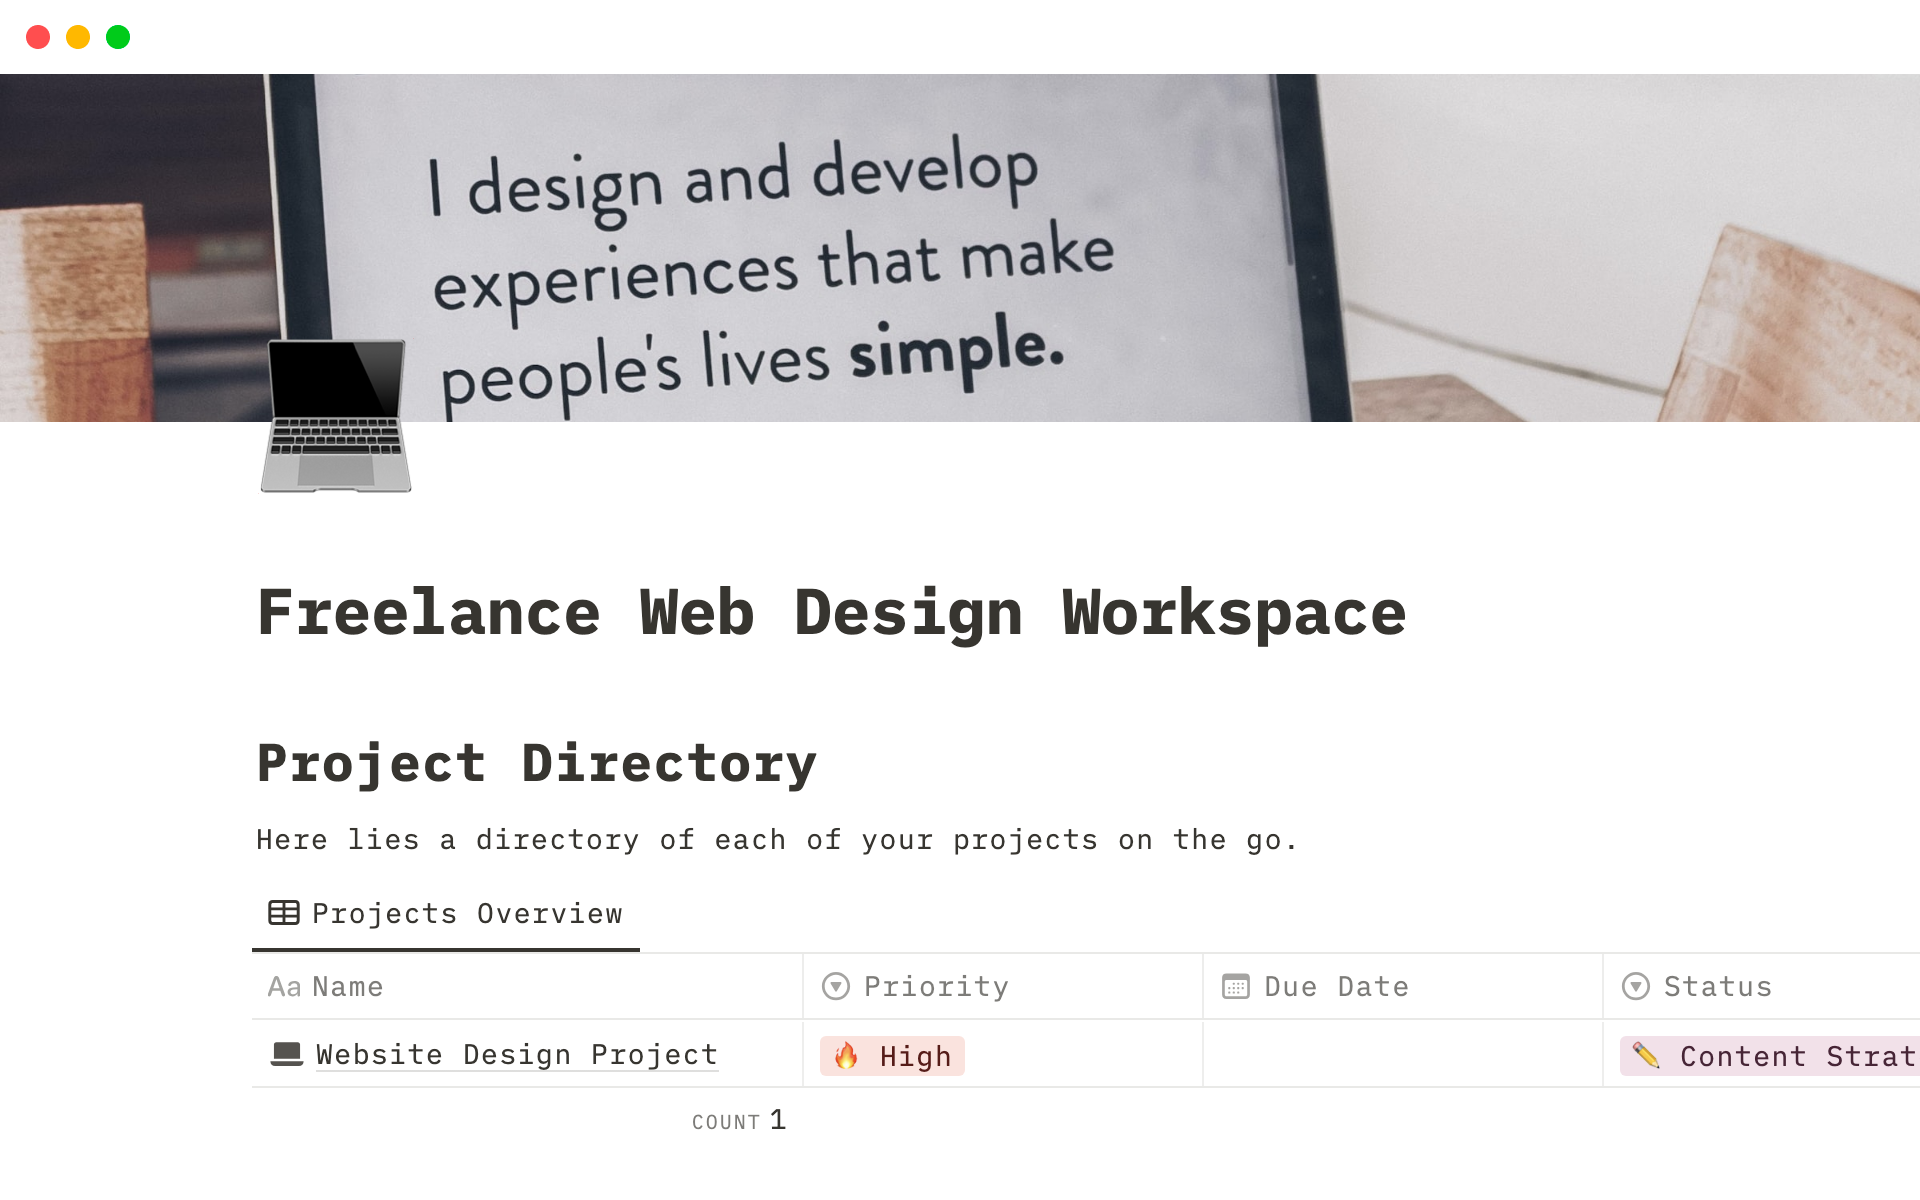 Provides instruction and structure for freelance web designers.